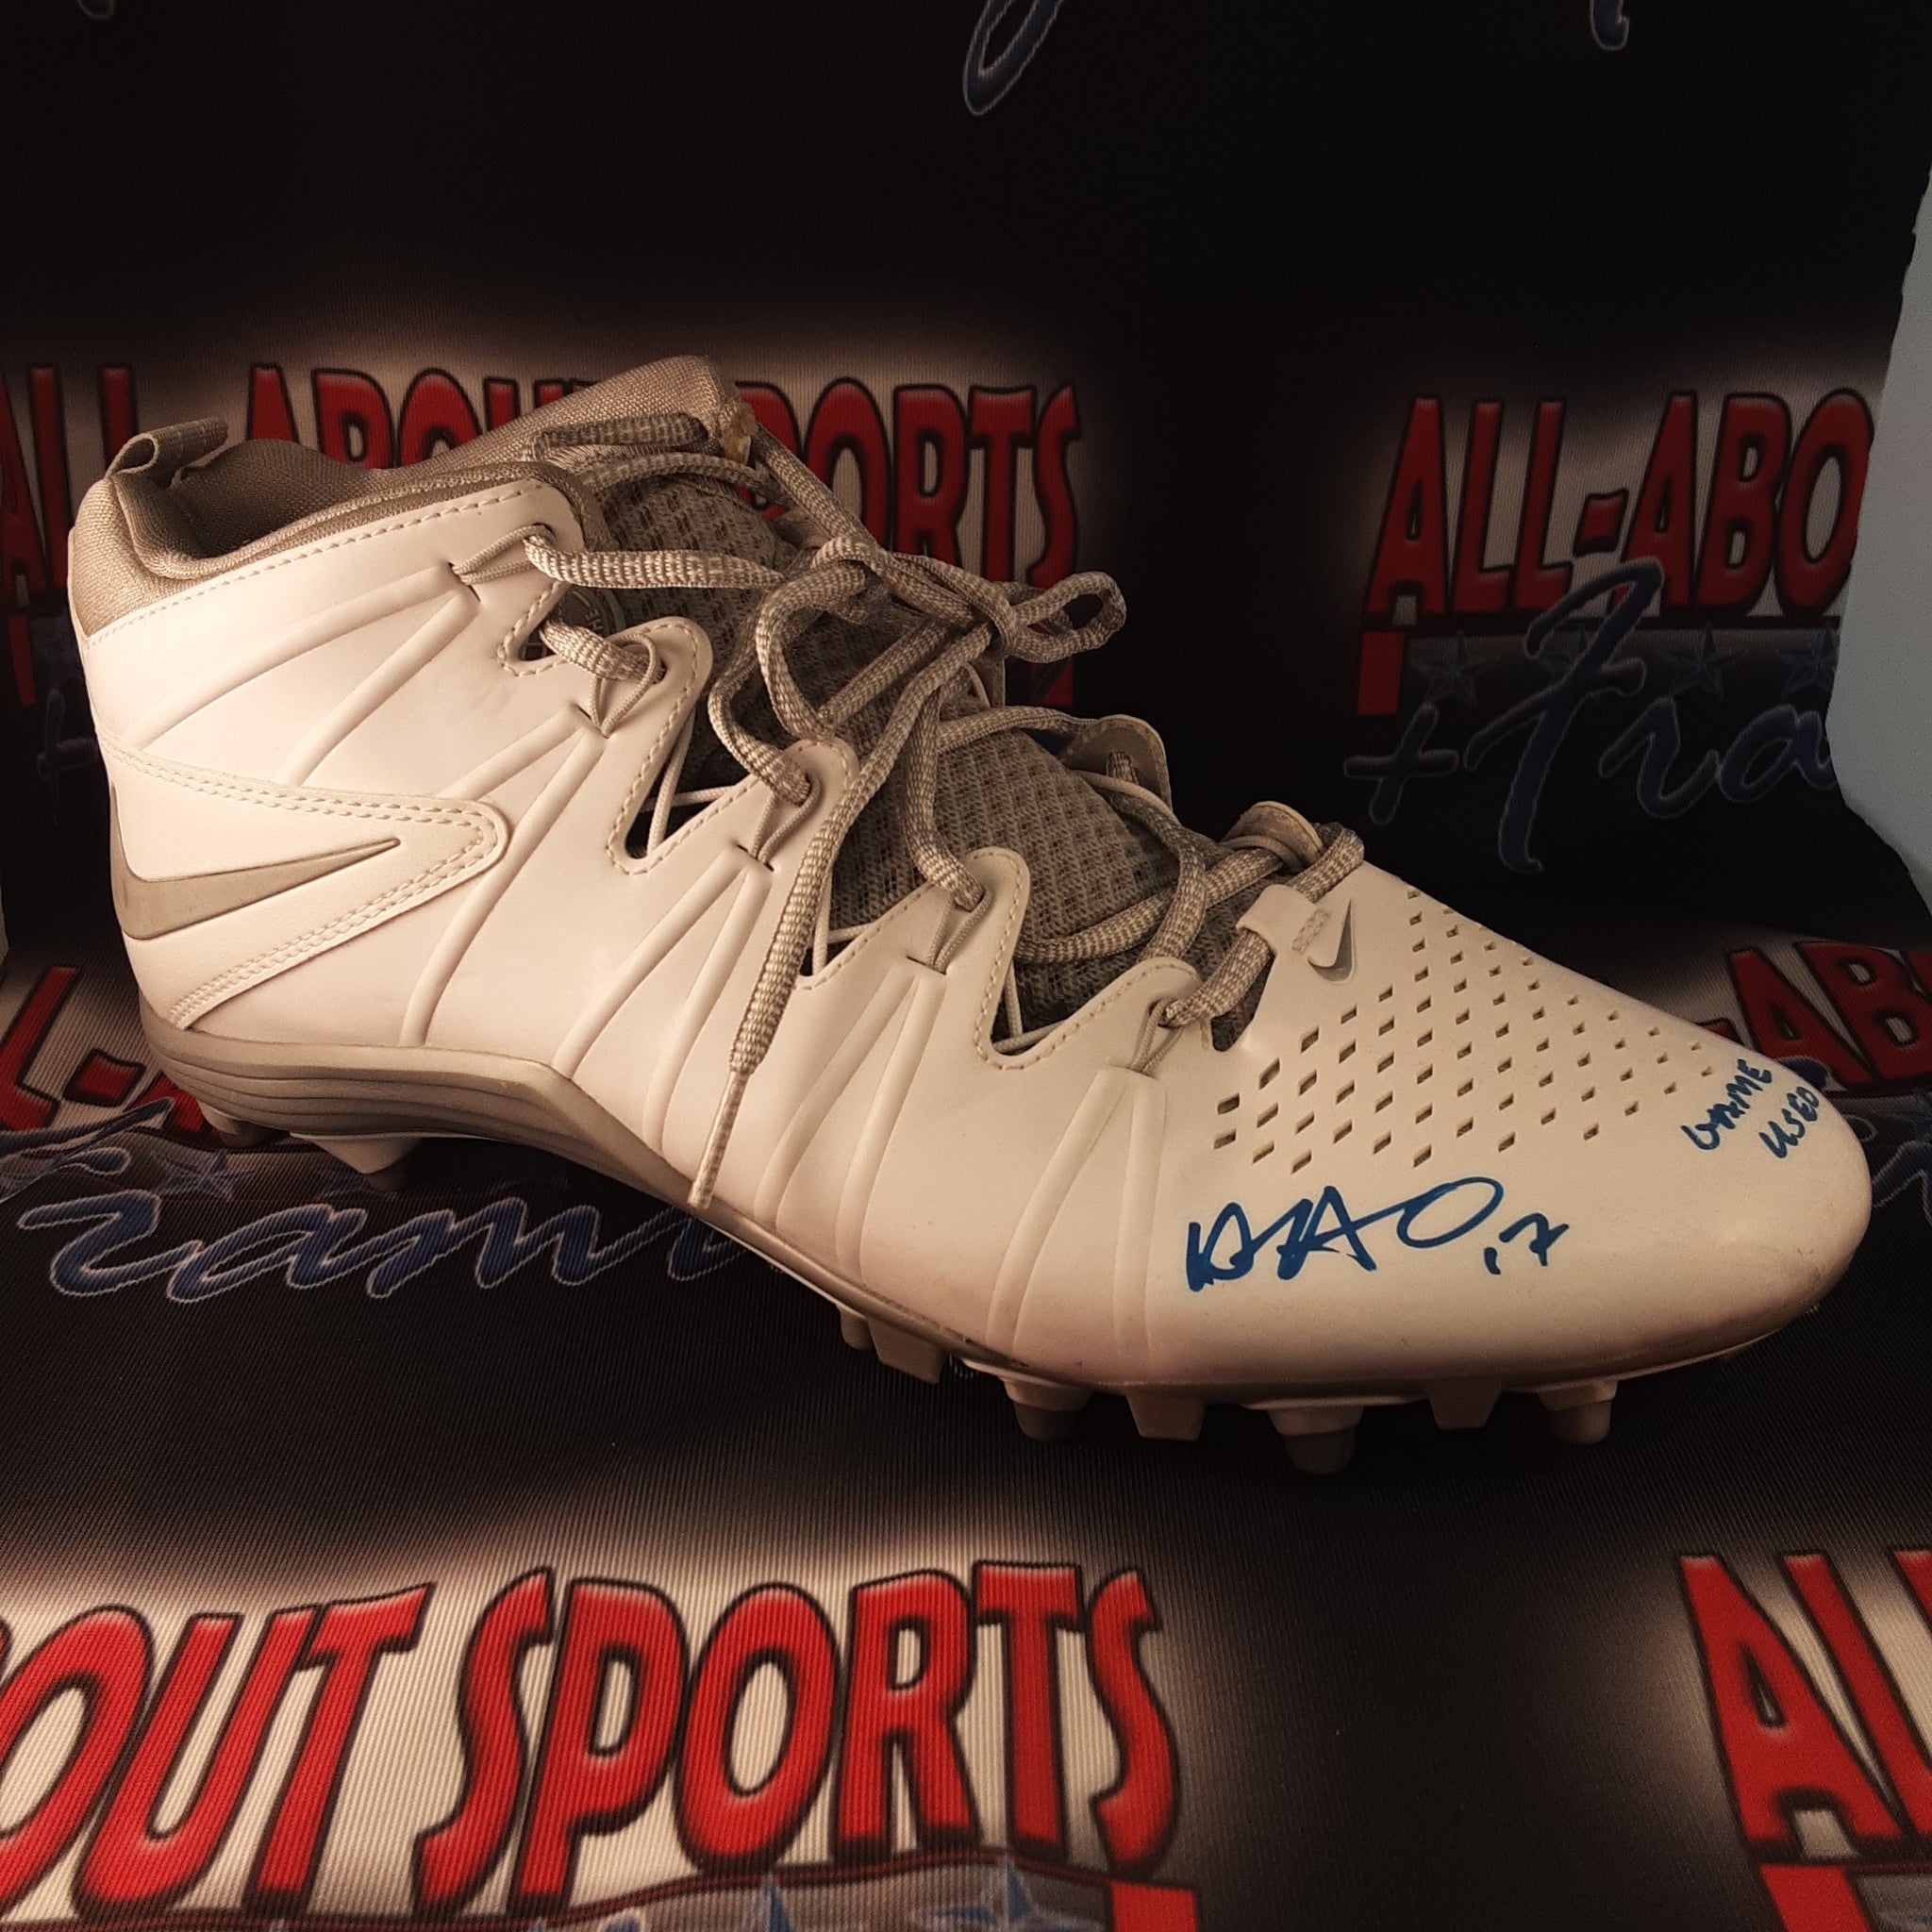 Dwayne Harris Authentic Game Used Signed Right Cleat Autographed JSA